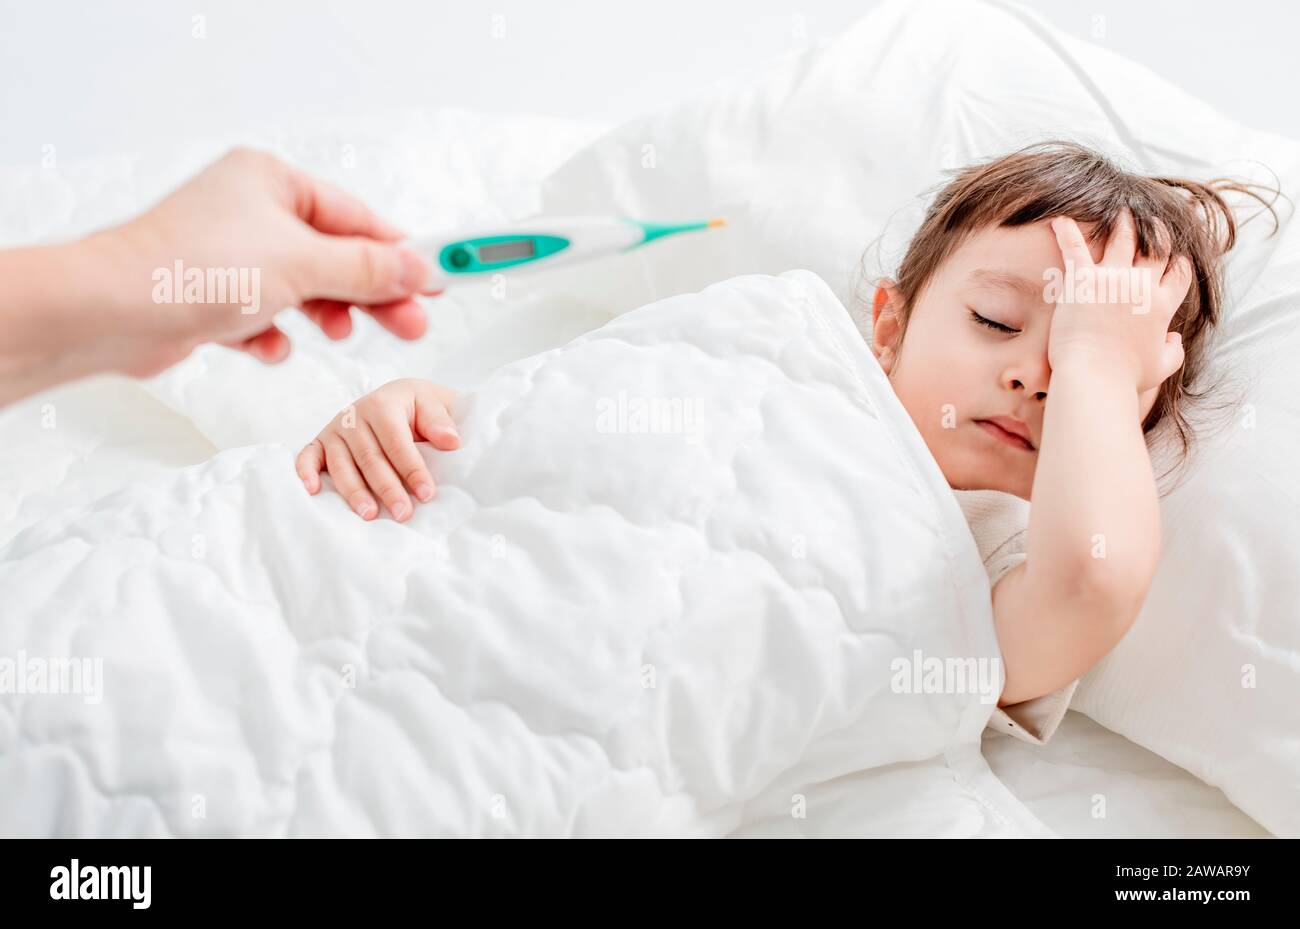 Sick child with flu fever laying in bed and mother holding thermometer Stock Photo